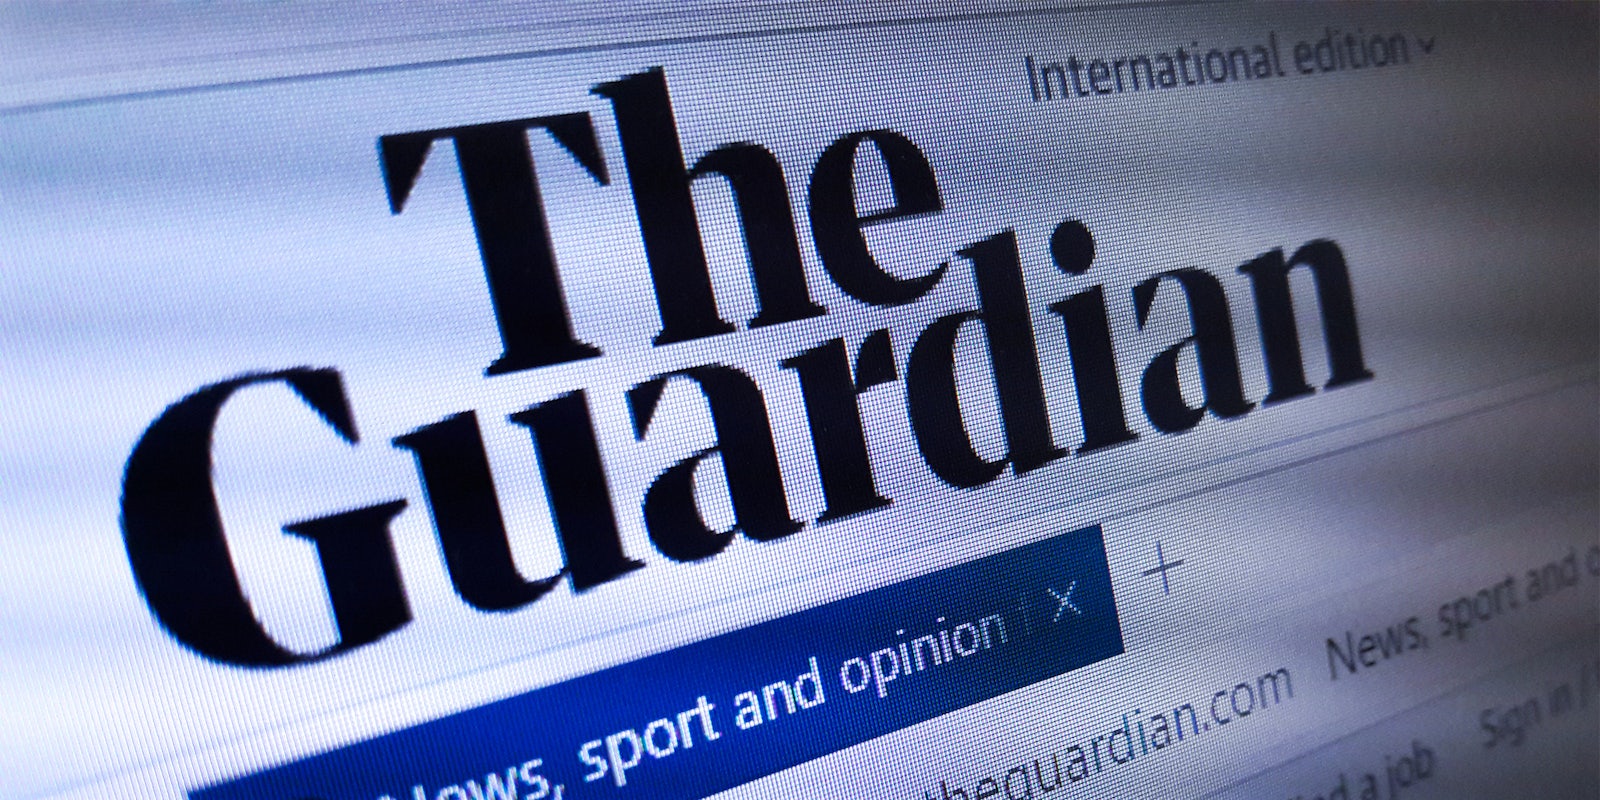 Homepage of The Guardian